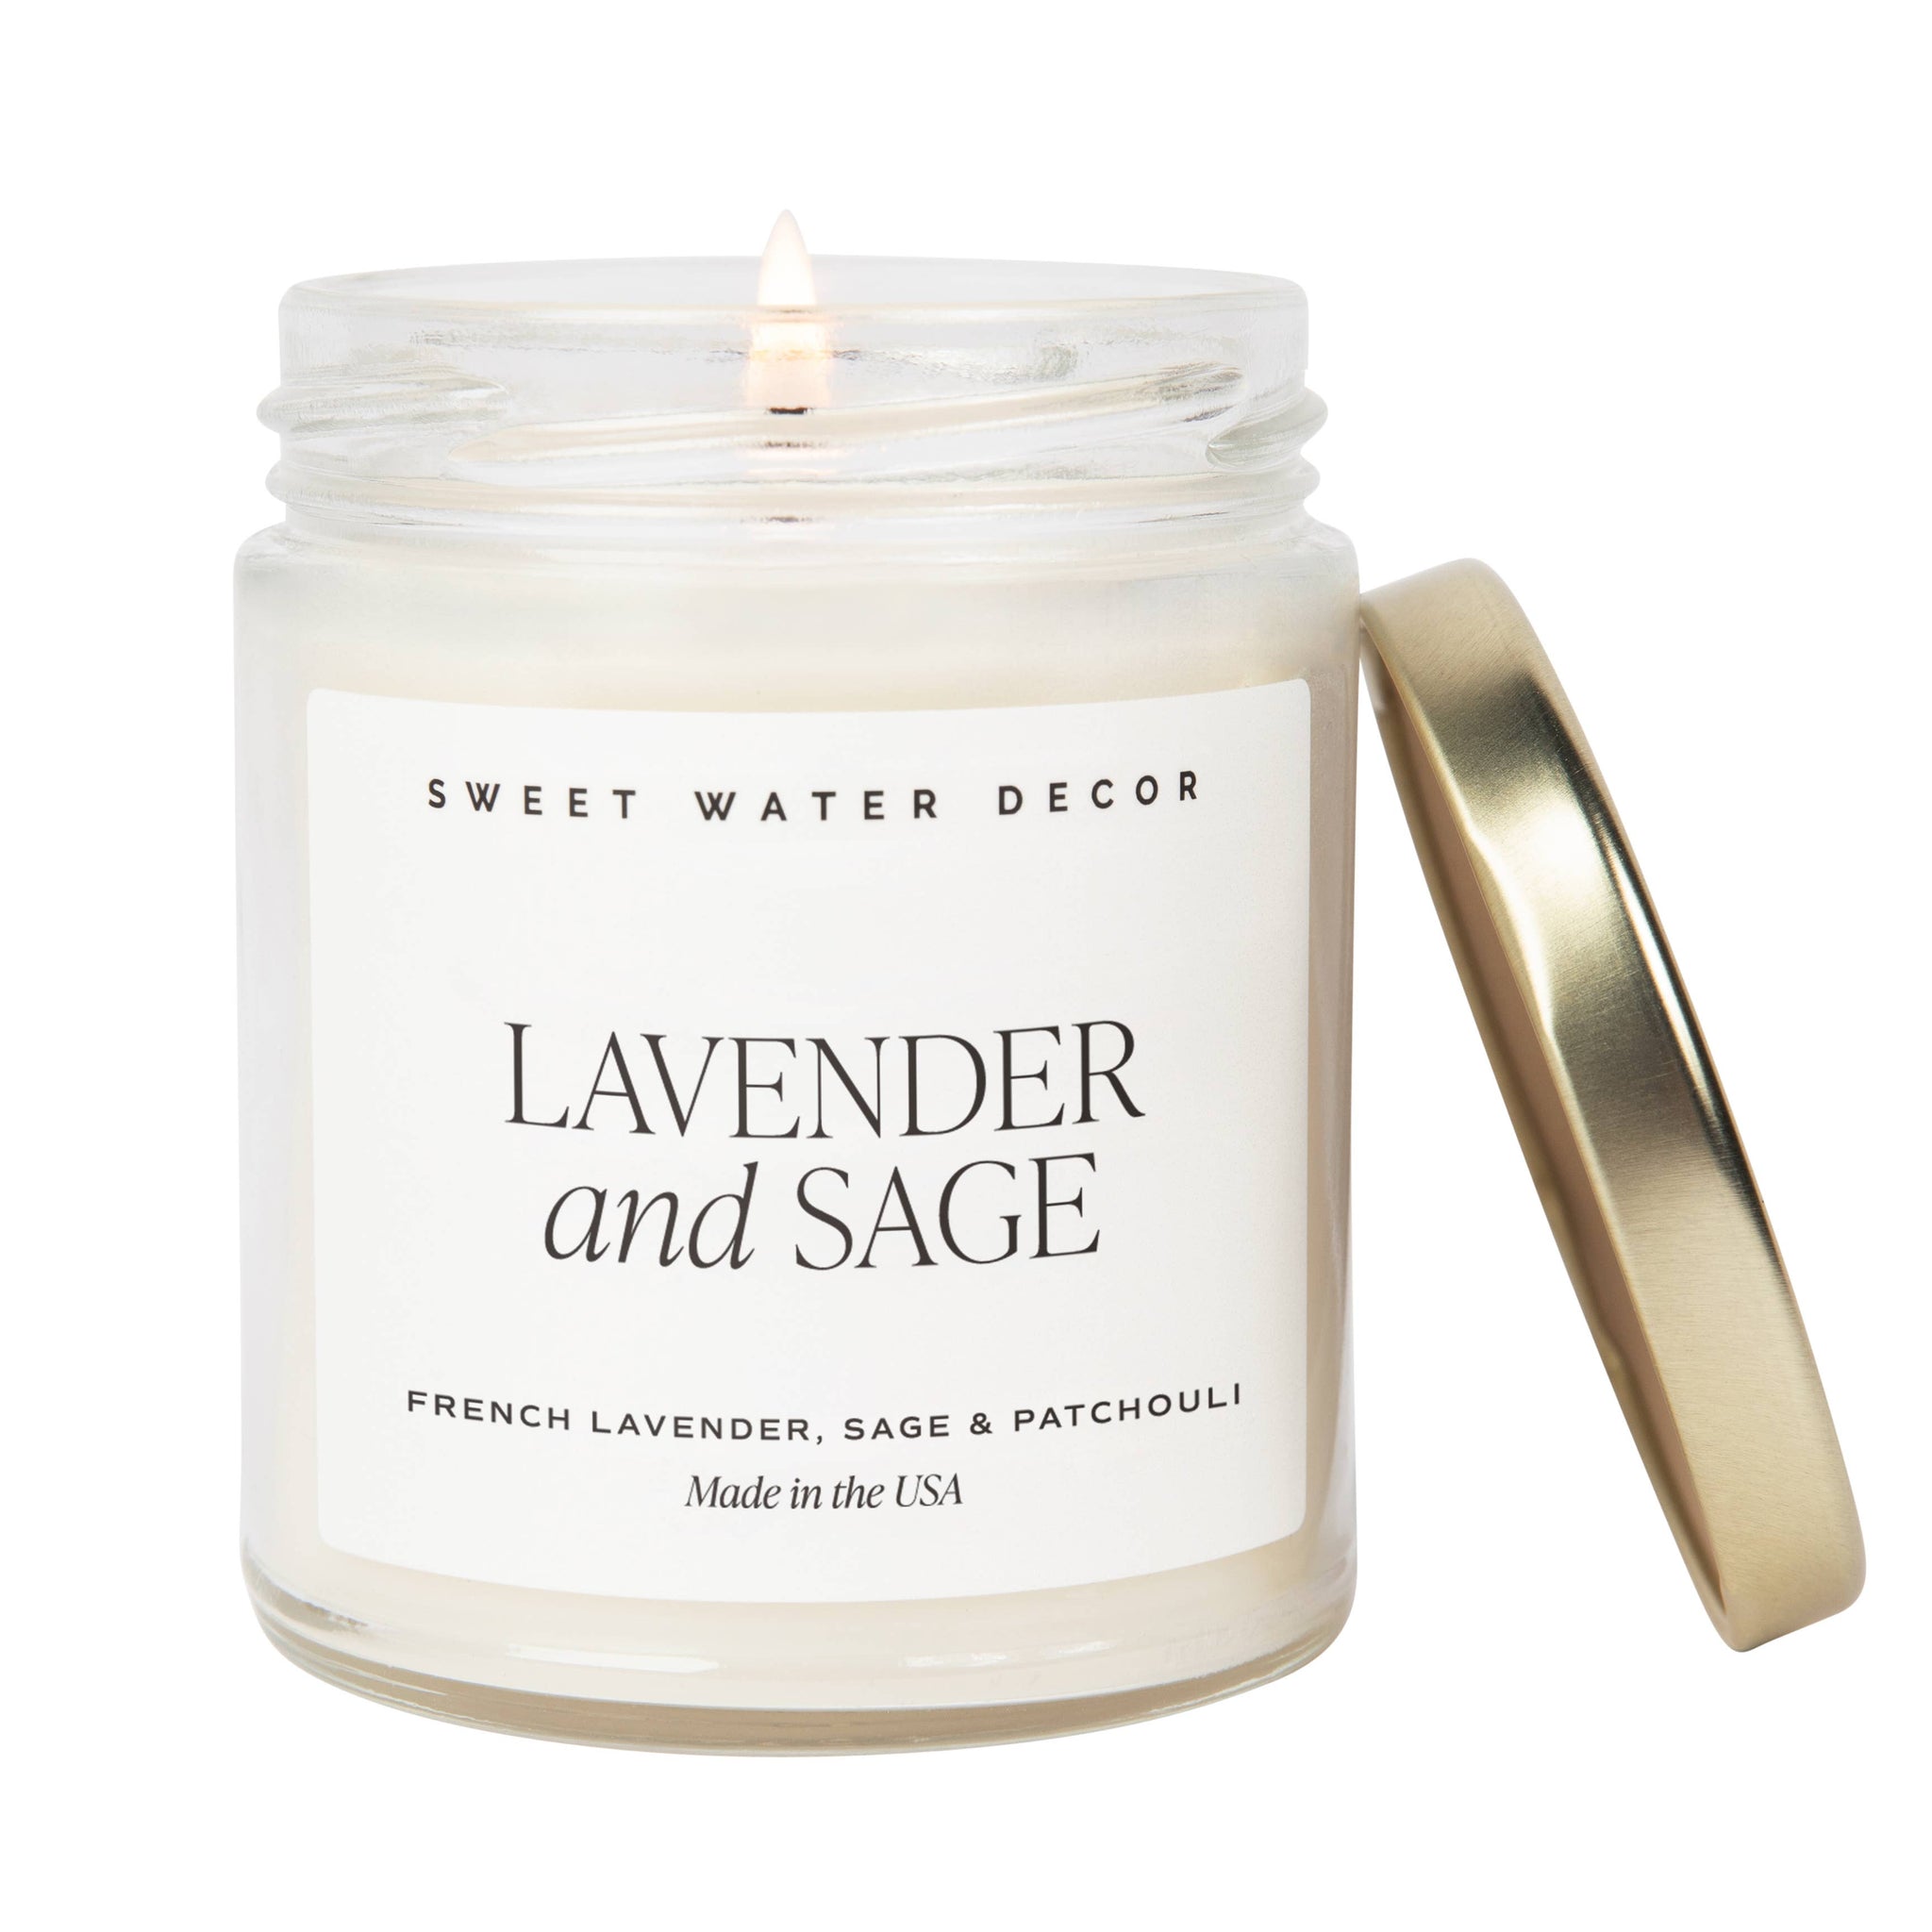 *NEW* Lavender and Sage Soy Candle - Clear Jar - 9 oz